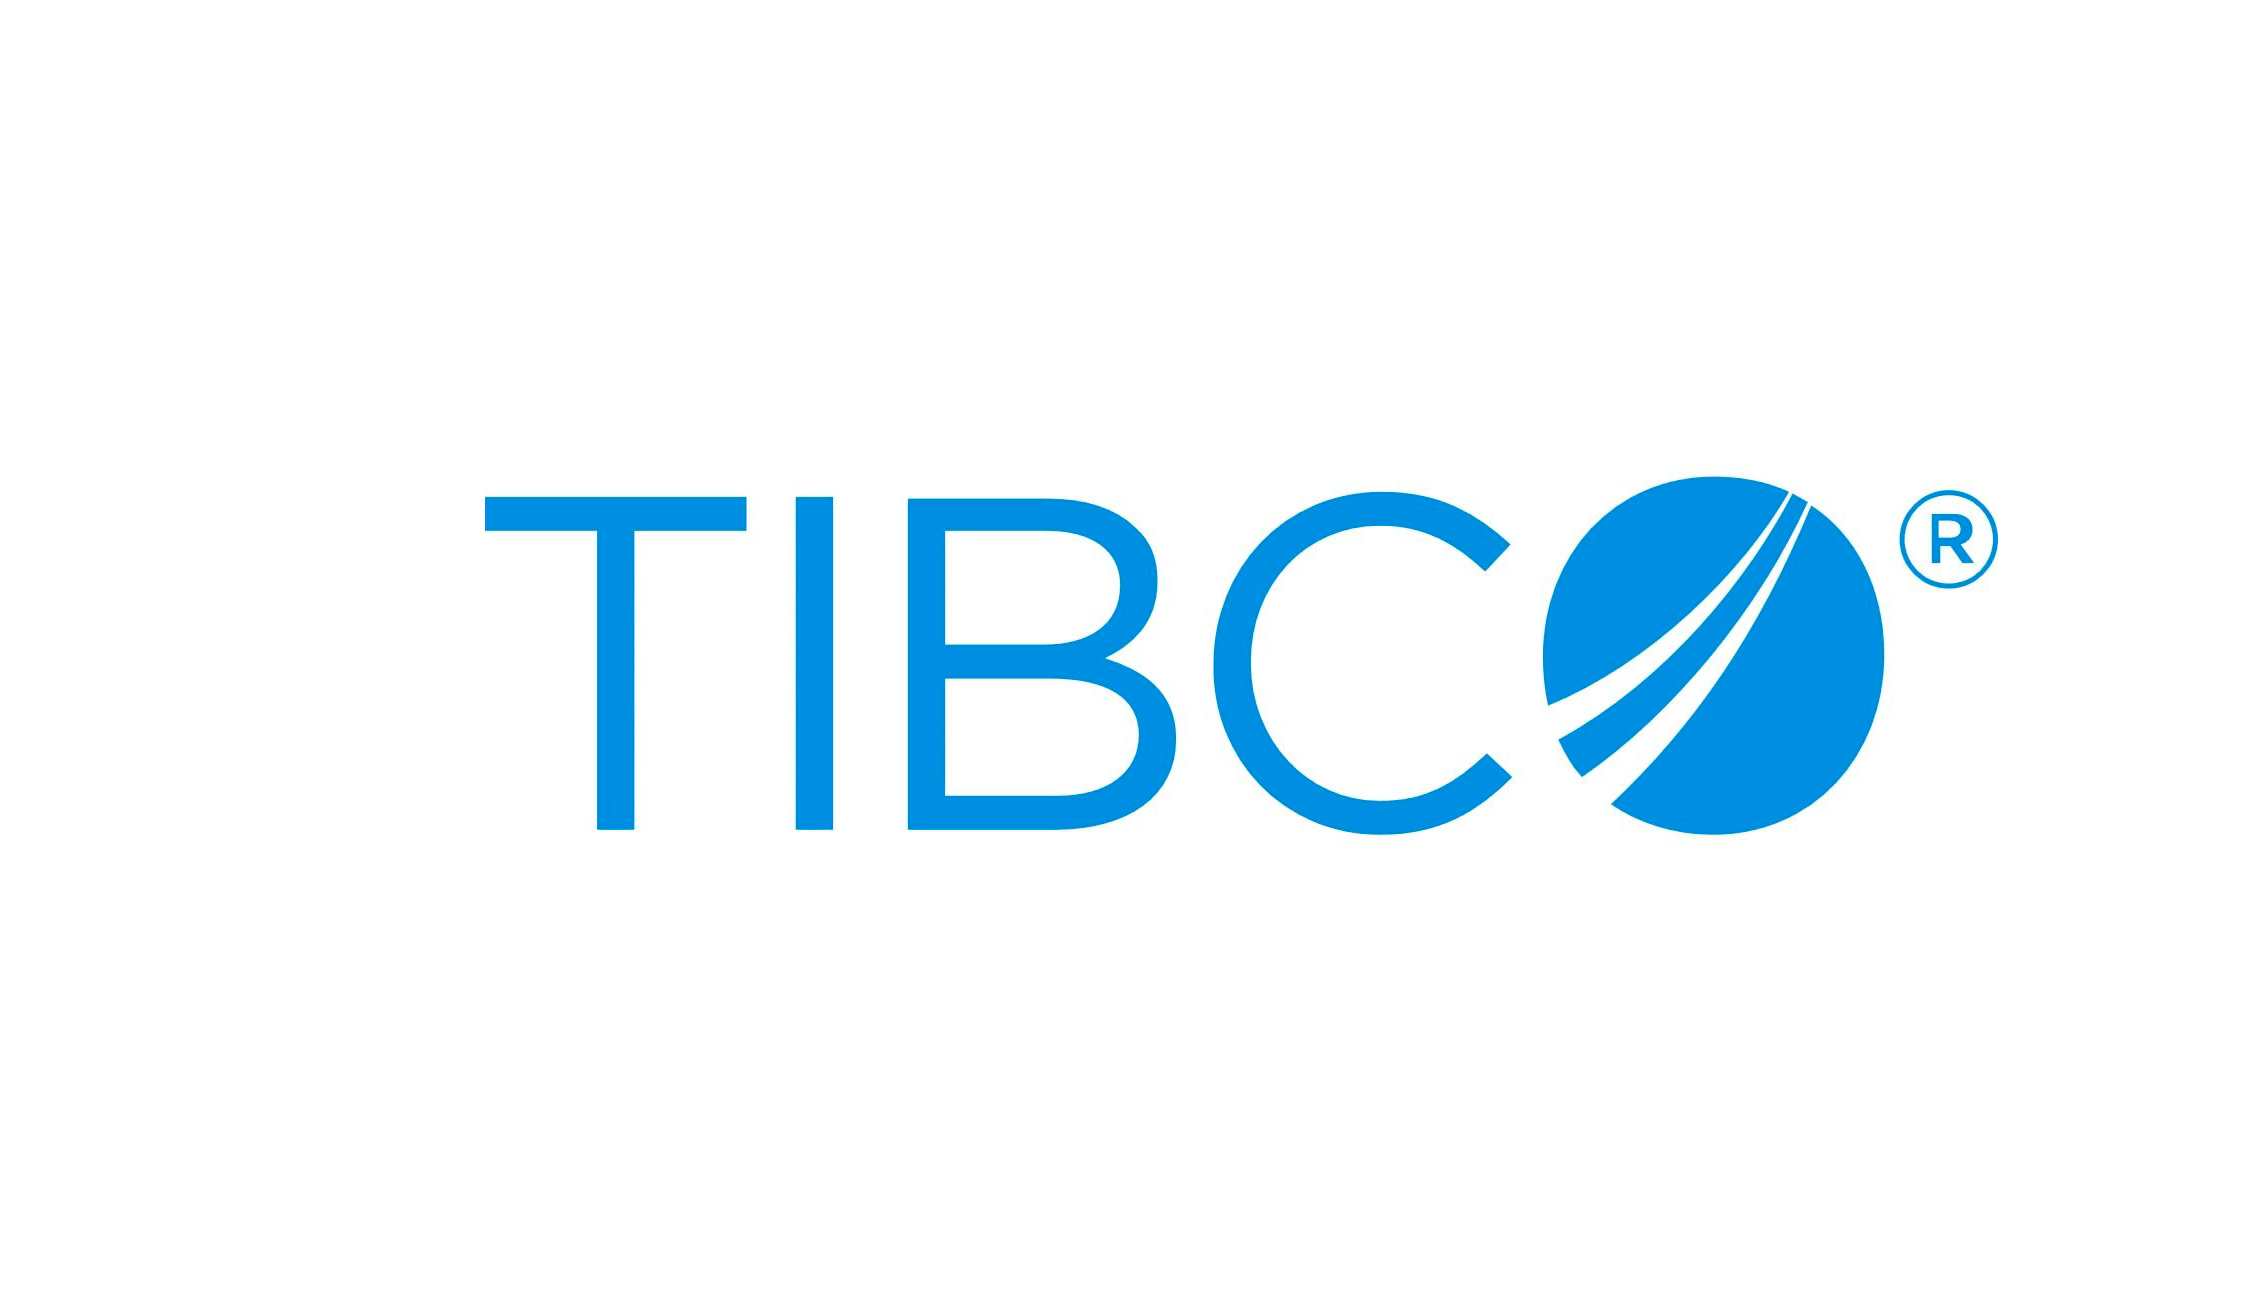 TIBCO's New Hyperconverged Analytics Approach Delivers Rapid, Actionable Insights for Customers